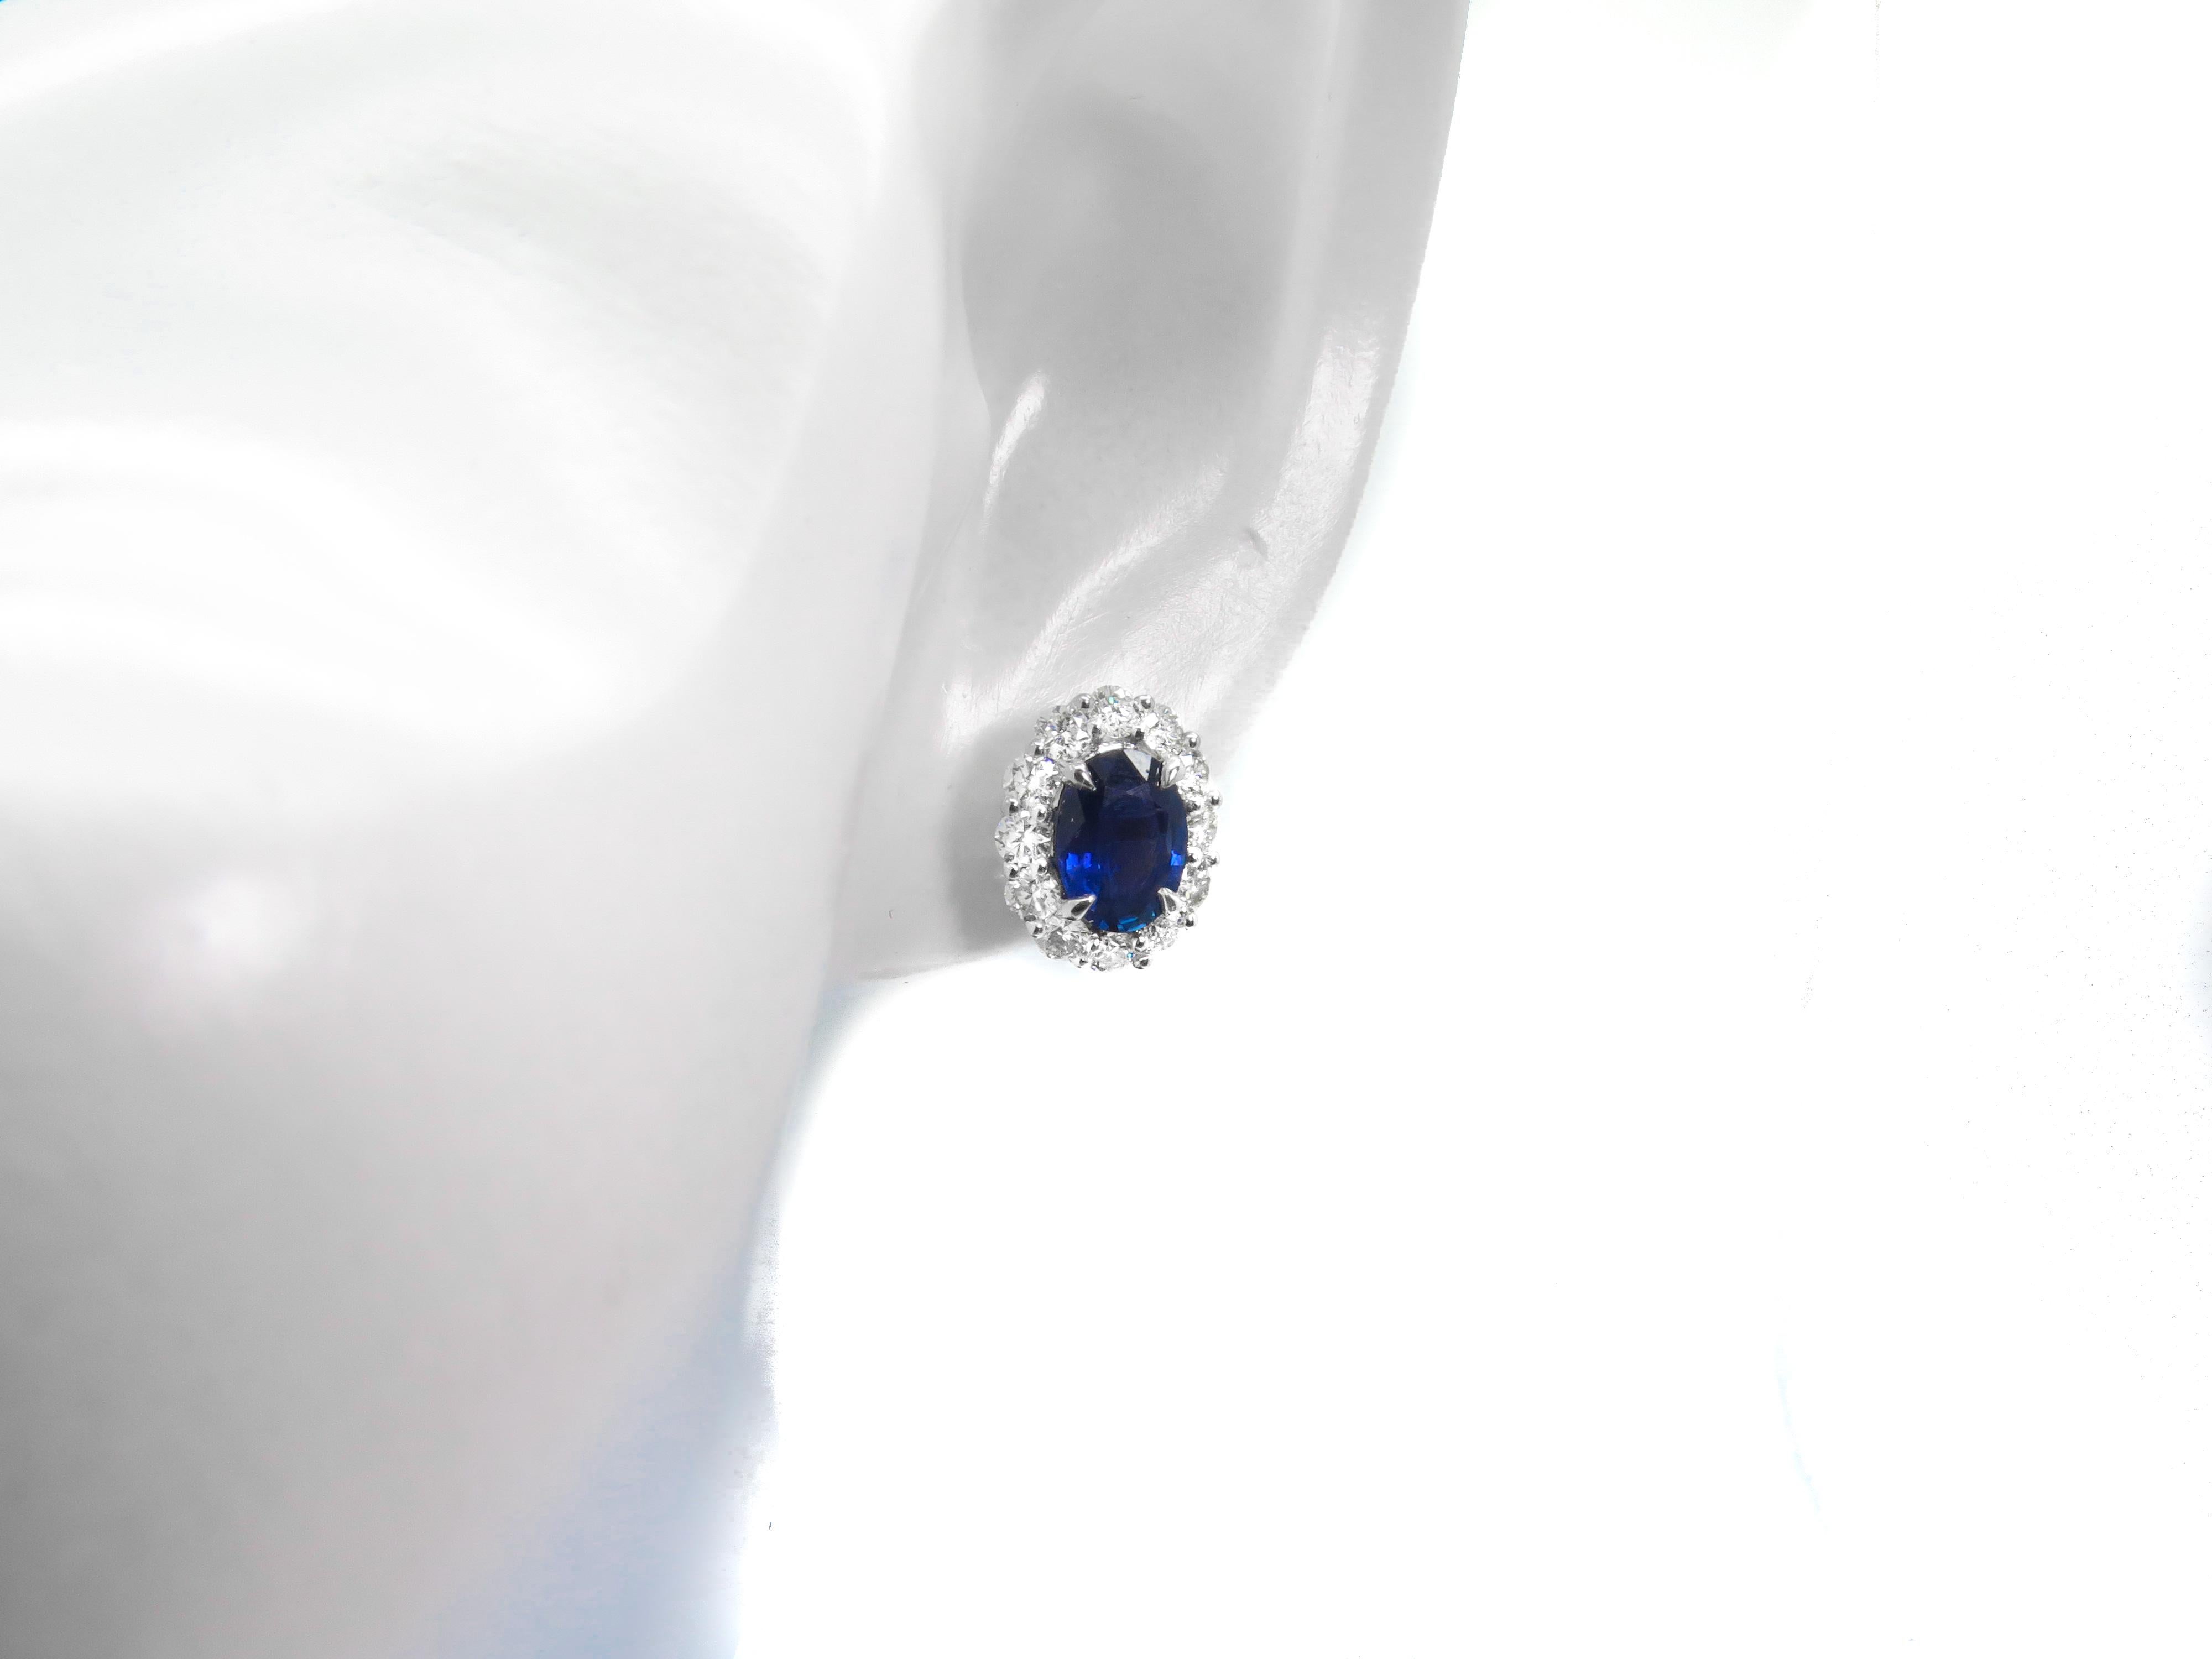 Each sapphire's hue is individual and nuanced; no two are alike. With tones ranging from deep velvety blue to crisp cornflower blue, our blue sapphires are gorgeous specimens of nature's beauty. 

An extraordinary pair of oval cut sapphires weighing